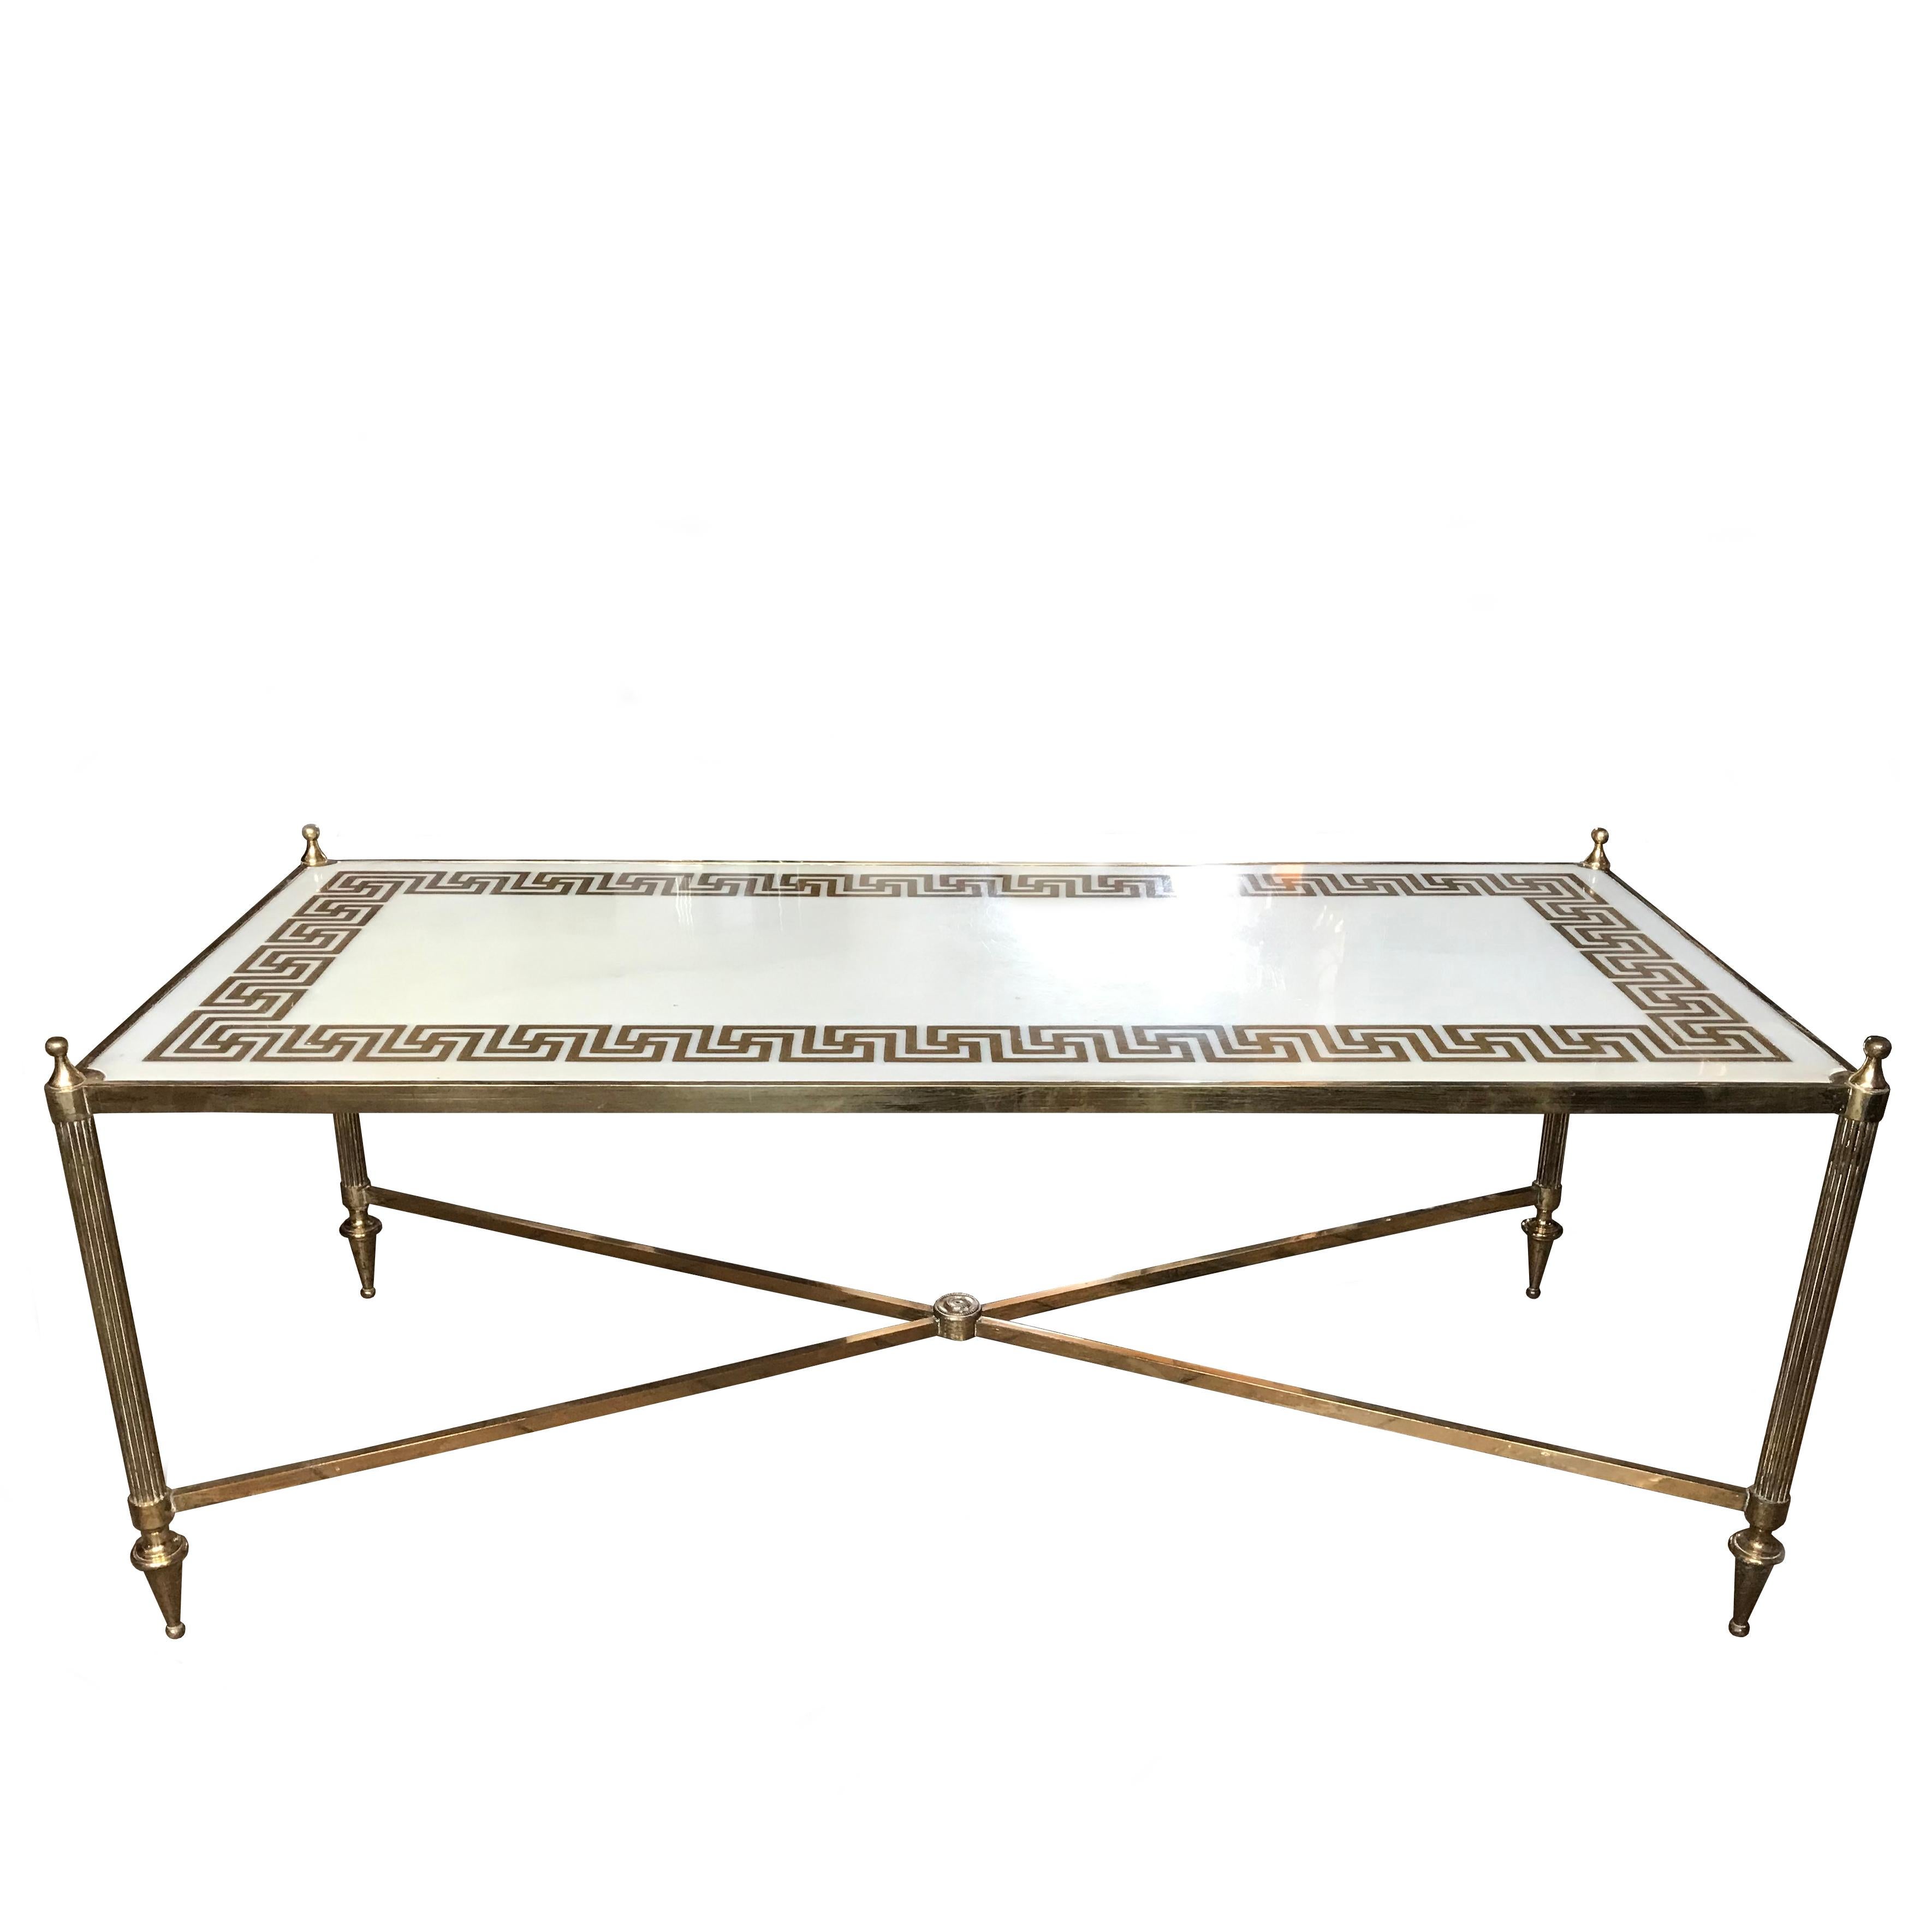 Maison Jansen style gilded bronze and marble table. Chic and super quality with a stylish Greek Key design.